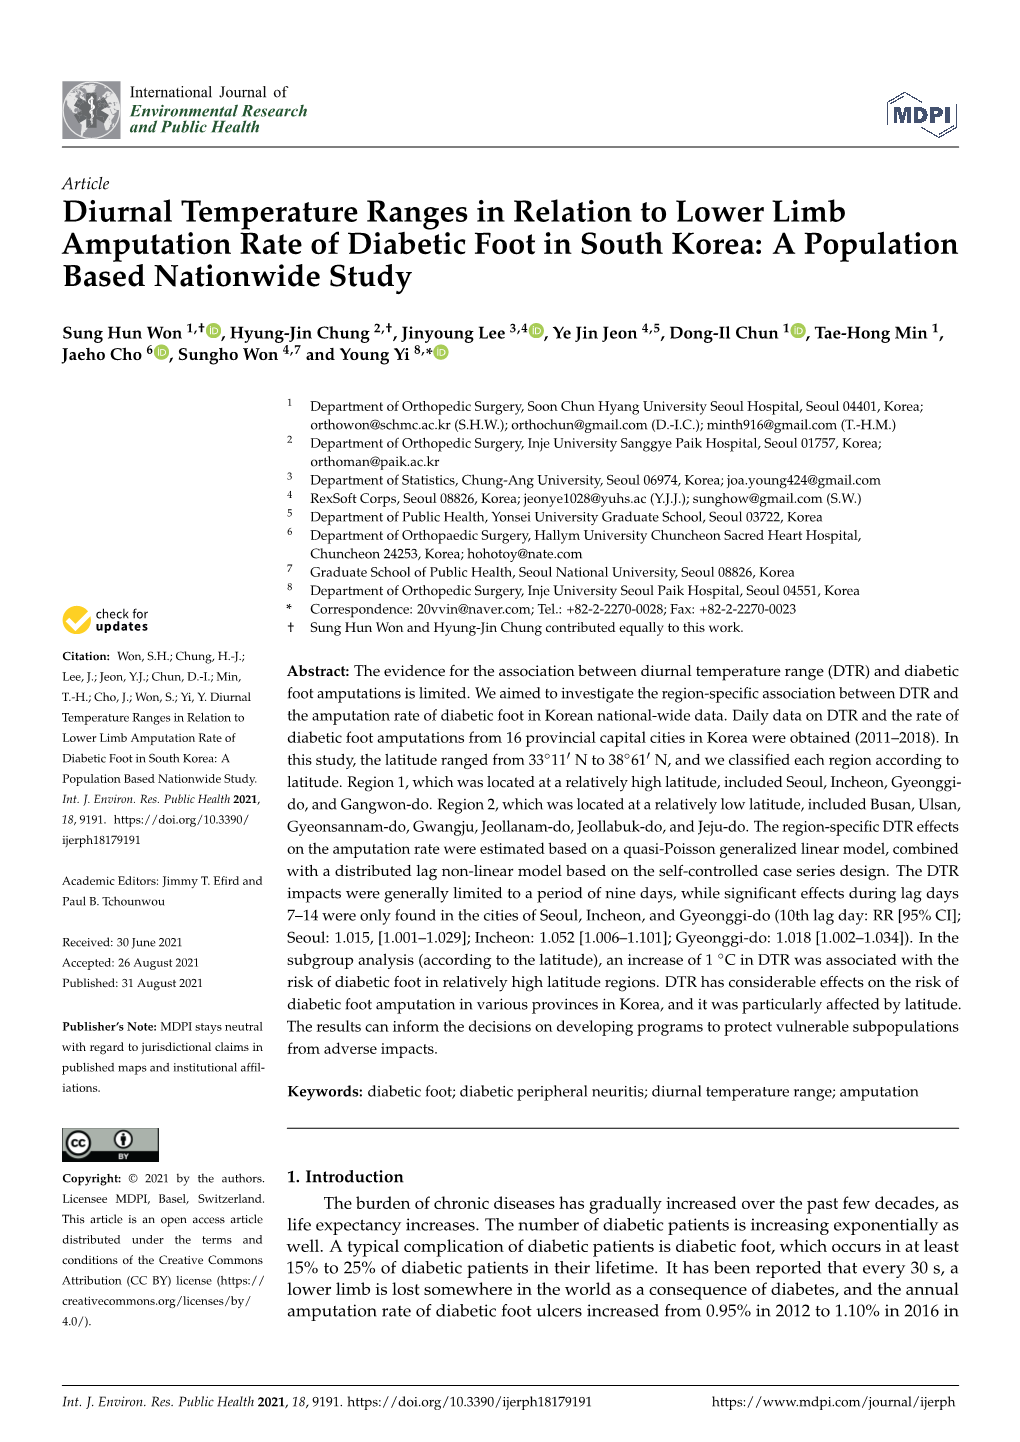 Diurnal Temperature Ranges in Relation to Lower Limb Amputation Rate of Diabetic Foot in South Korea: a Population Based Nationwide Study